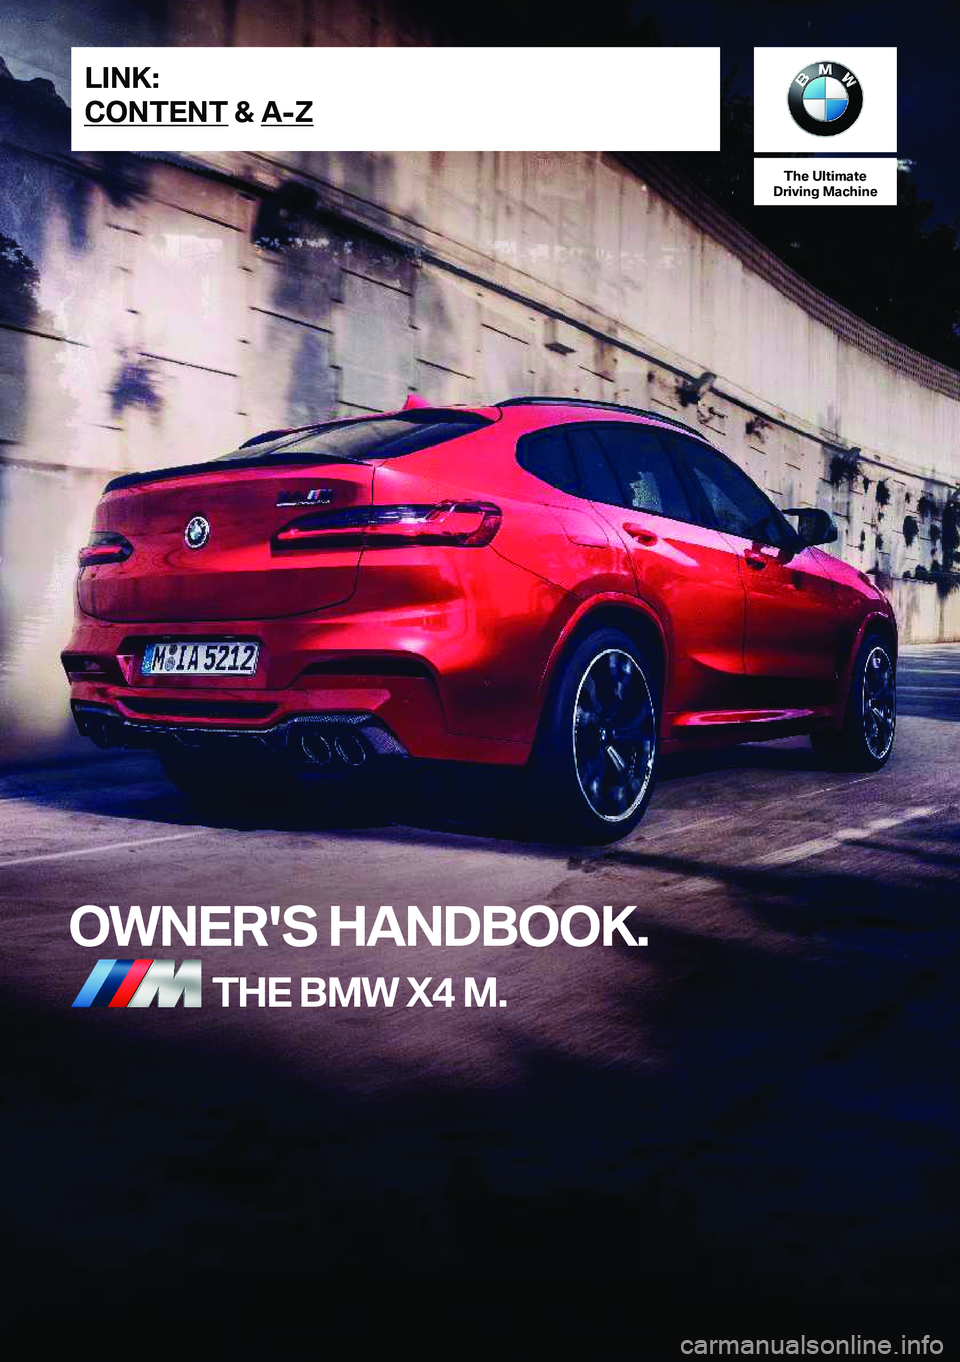 BMW X4 M 2021  Owners Manual �T�h�e��U�l�t�i�m�a�t�e
�D�r�i�v�i�n�g��M�a�c�h�i�n�e
�O�W�N�E�R�'�S��H�A�N�D�B�O�O�K�.�T�H�E��B�M�W��X�4��M�.�L�I�N�K�:
�C�O�N�T�E�N�T��&��A�-�Z�O�n�l�i�n�e��E�d�i�t�i�o�n��f�o�r��P�a�